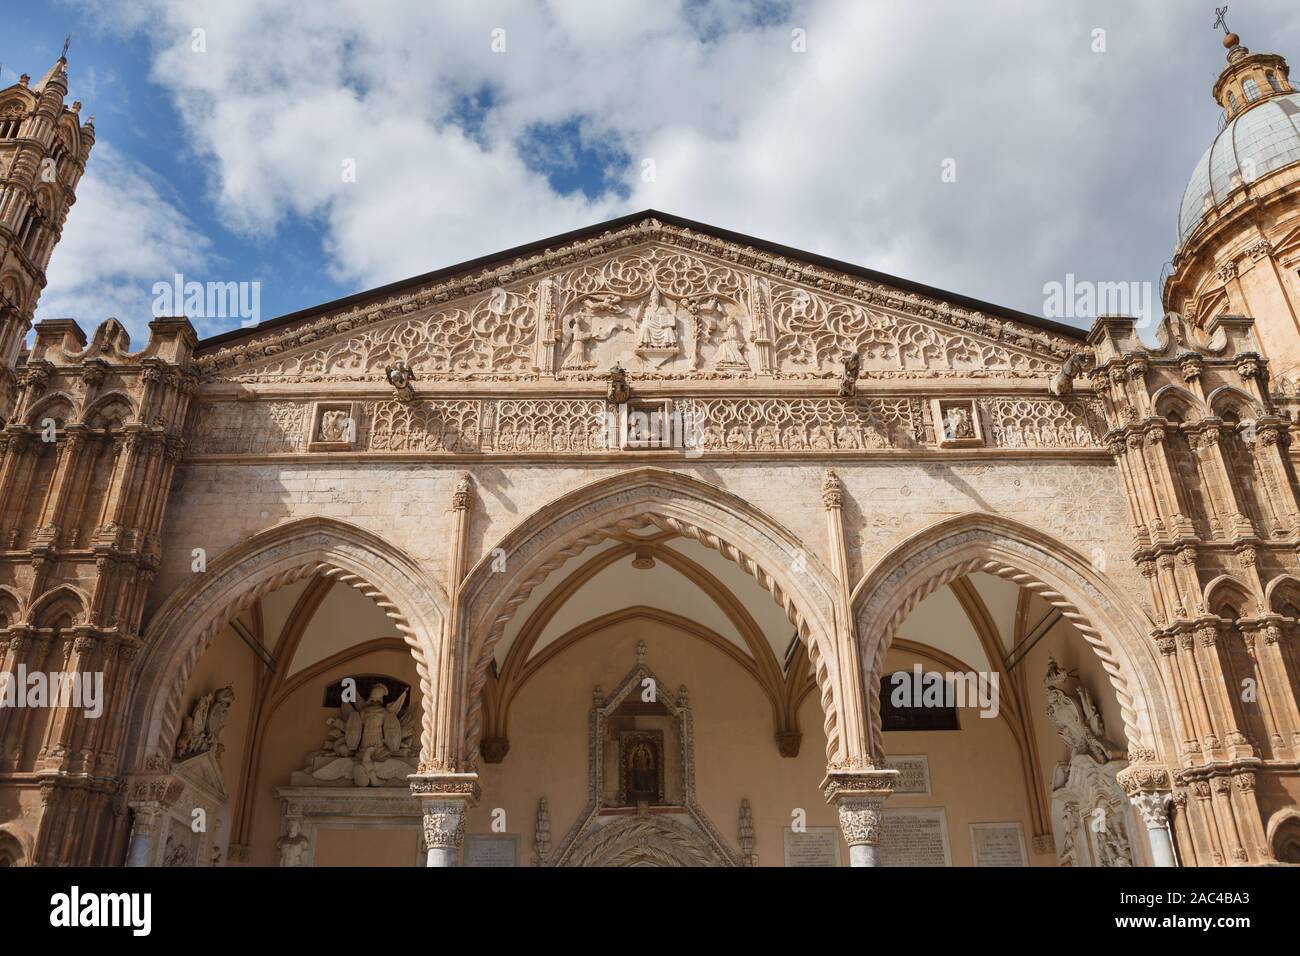 South portico of cathedral of Palermo. Palermo, Sicily, Italy. Stock Photo